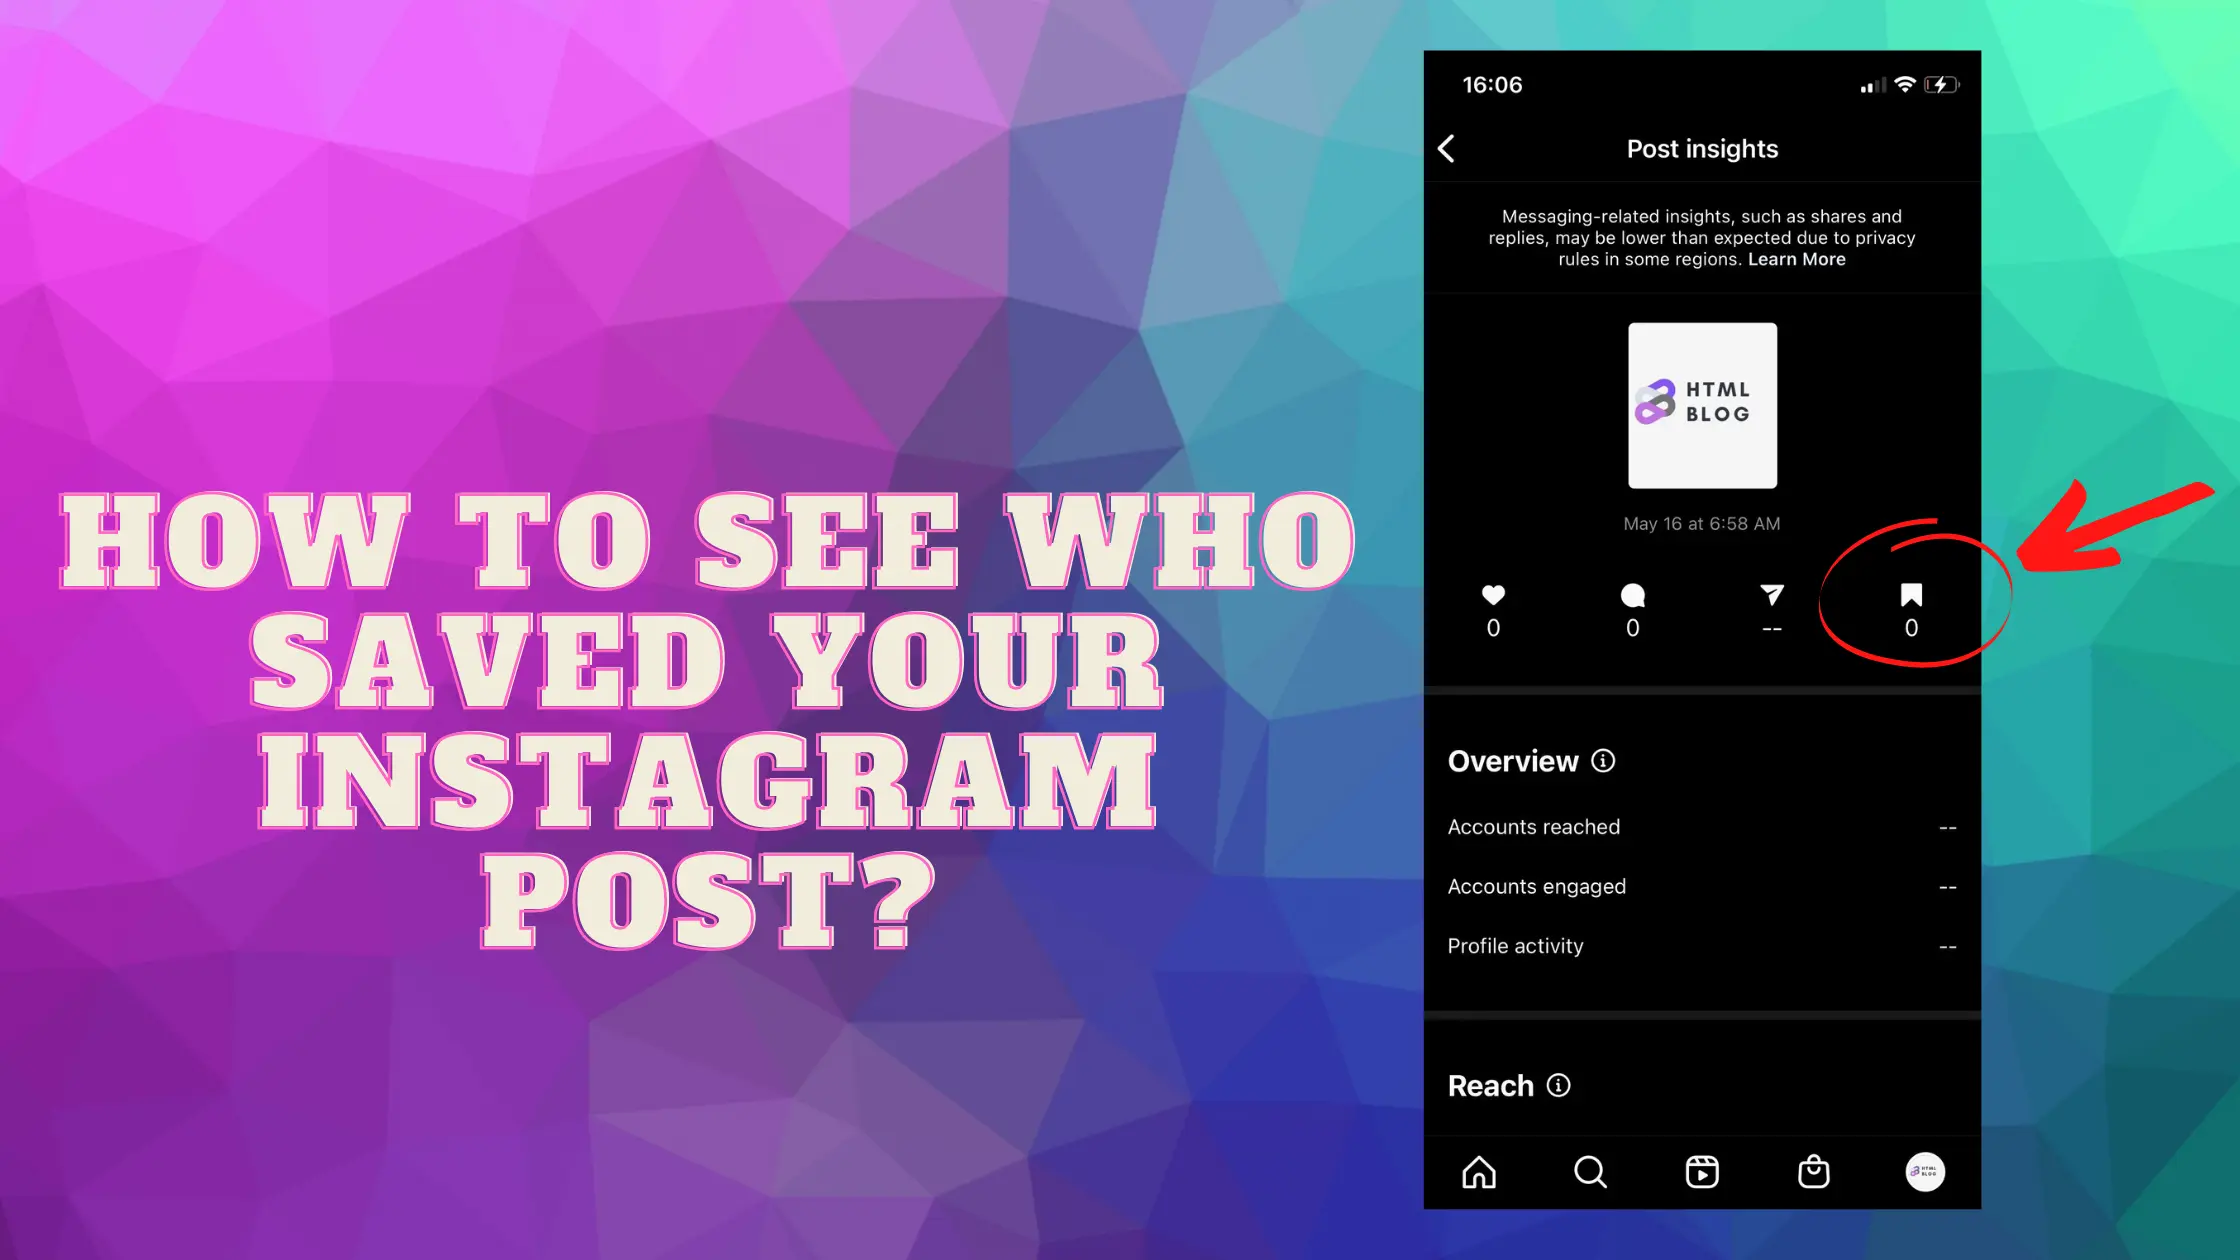 Instagram insights showing how many users saved your Instagram post